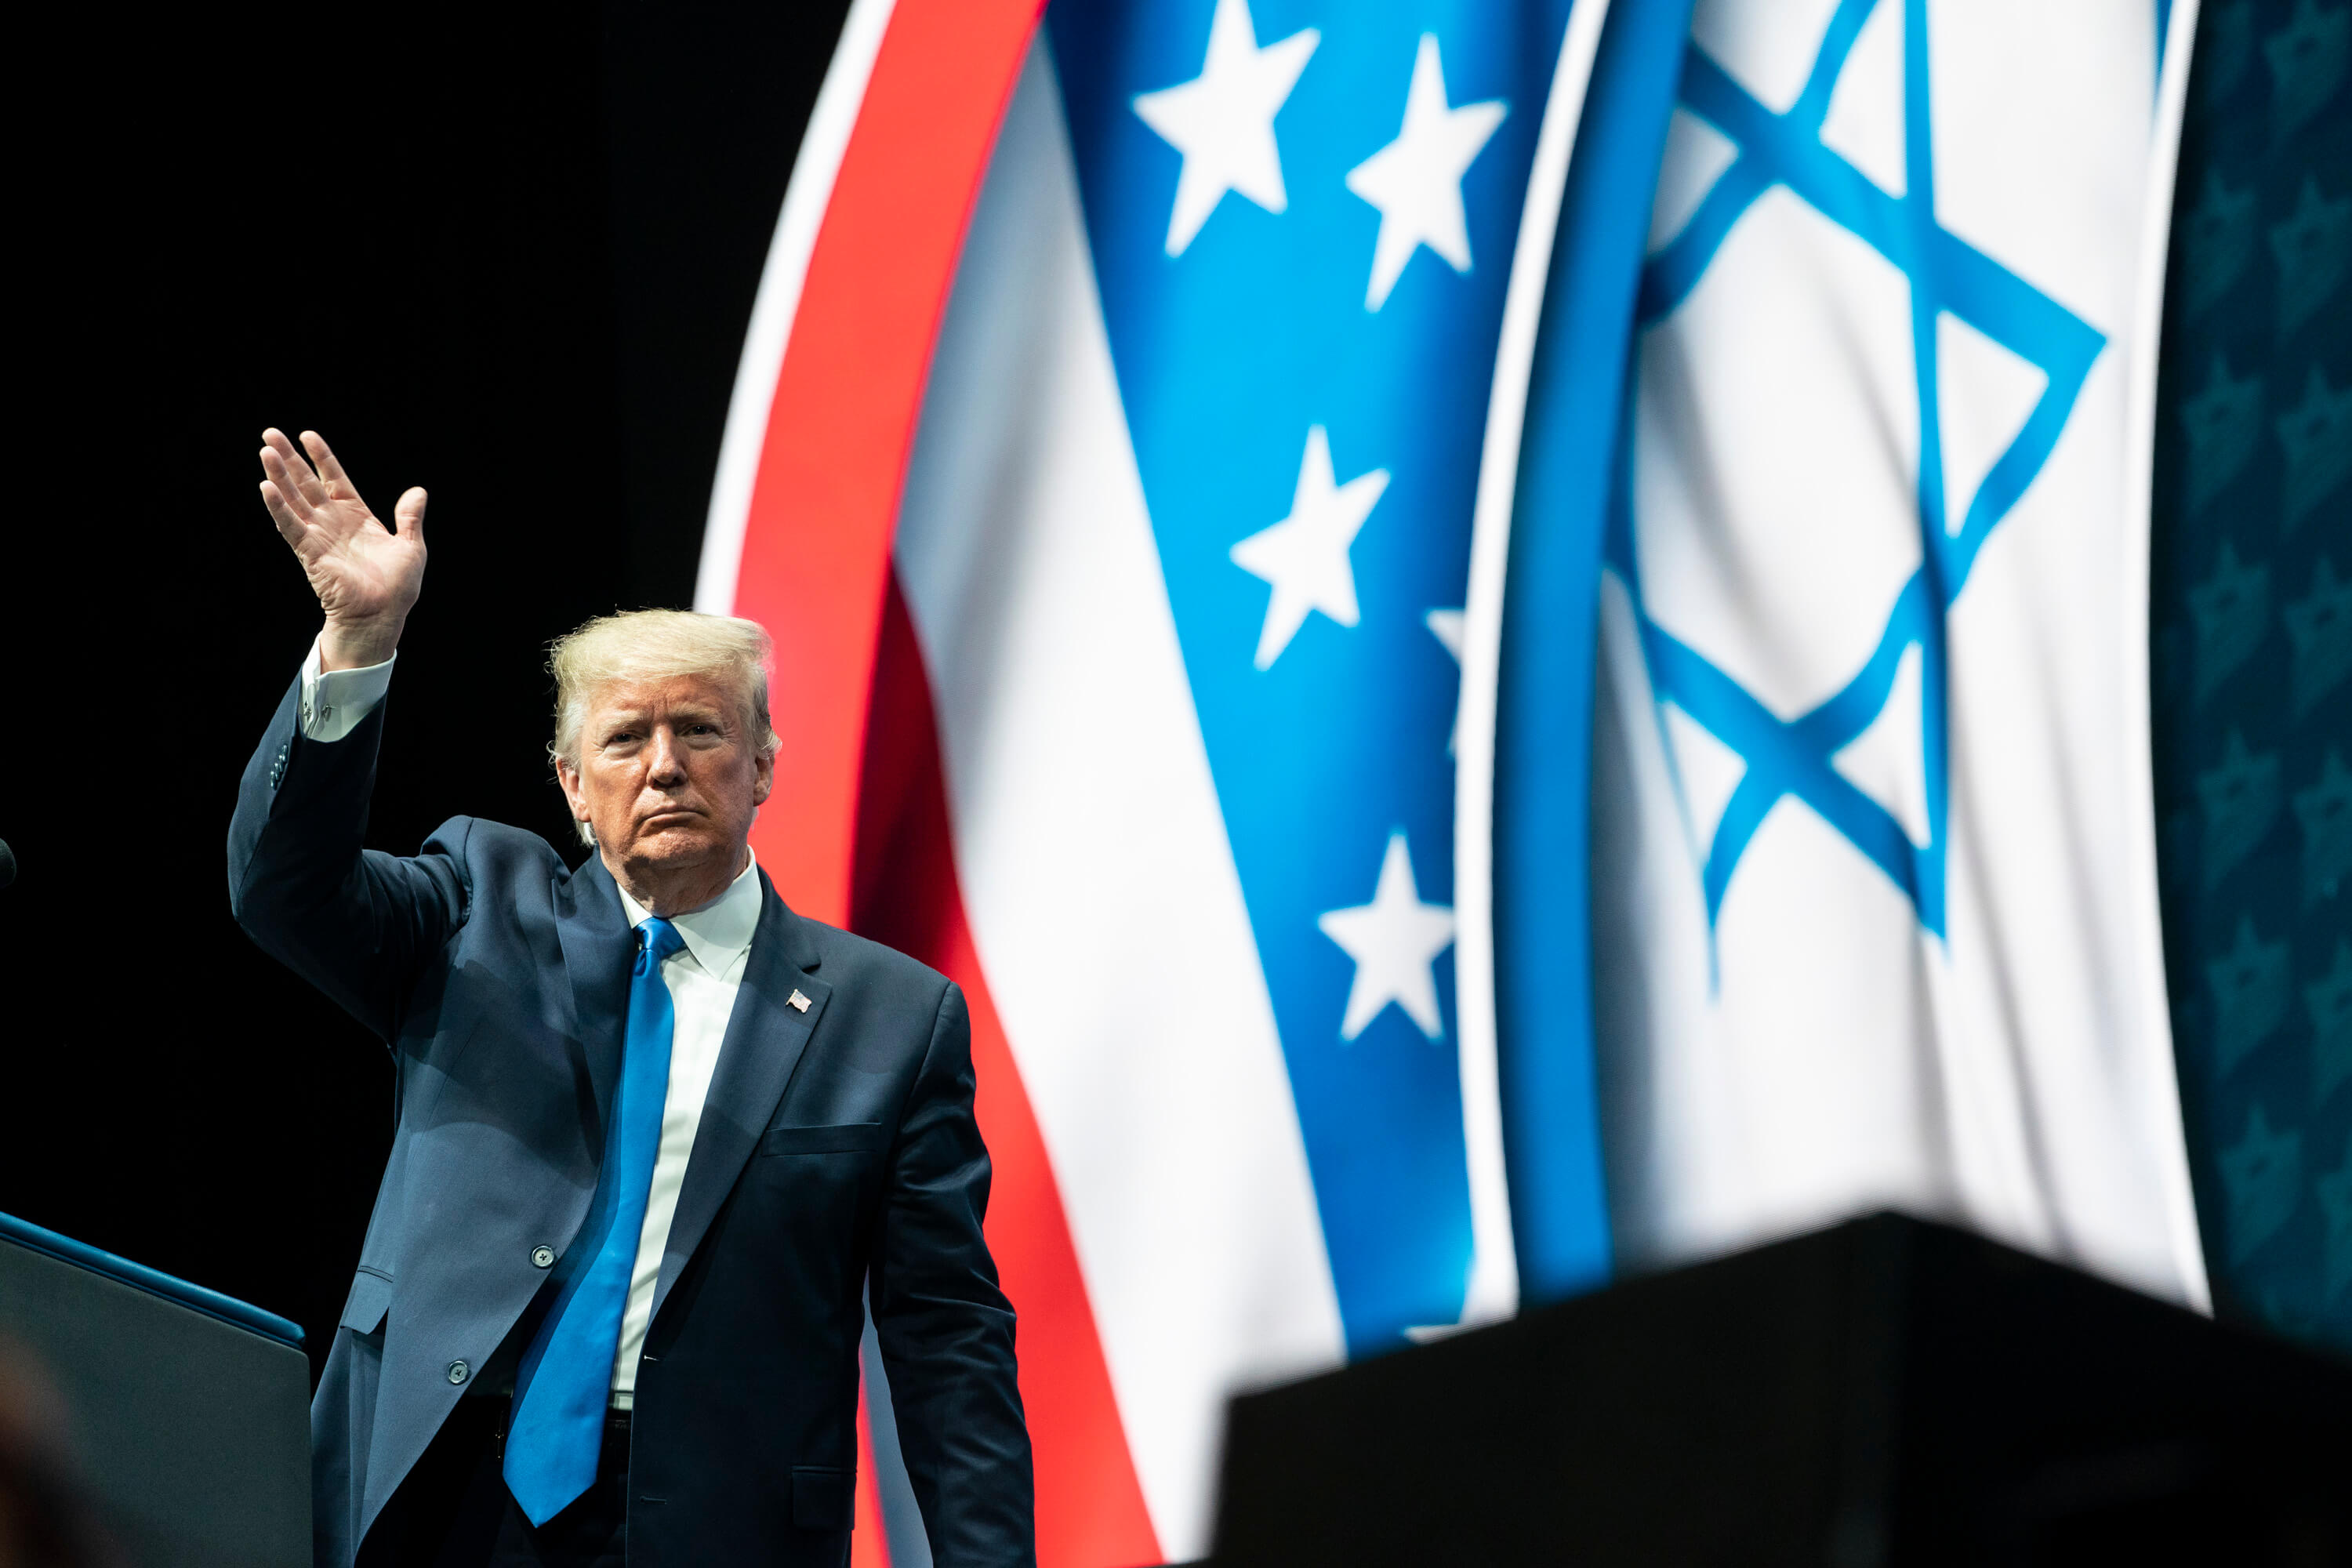 President Trump at the Israeli American Council National Summit, 2019. © The White House - Flickr.jpg